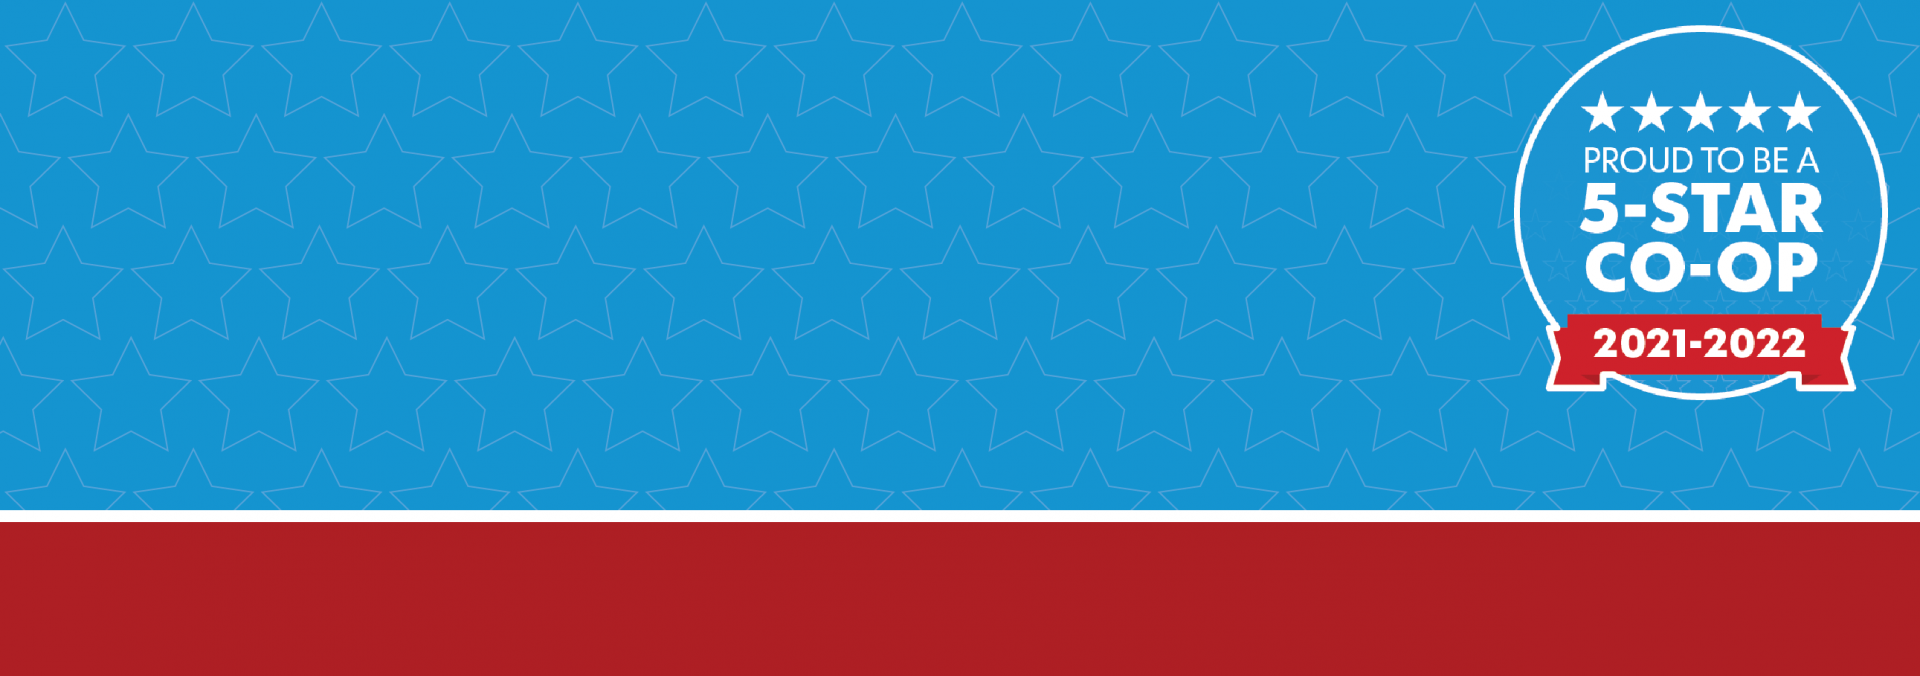 Red, white and blue graphic with stars